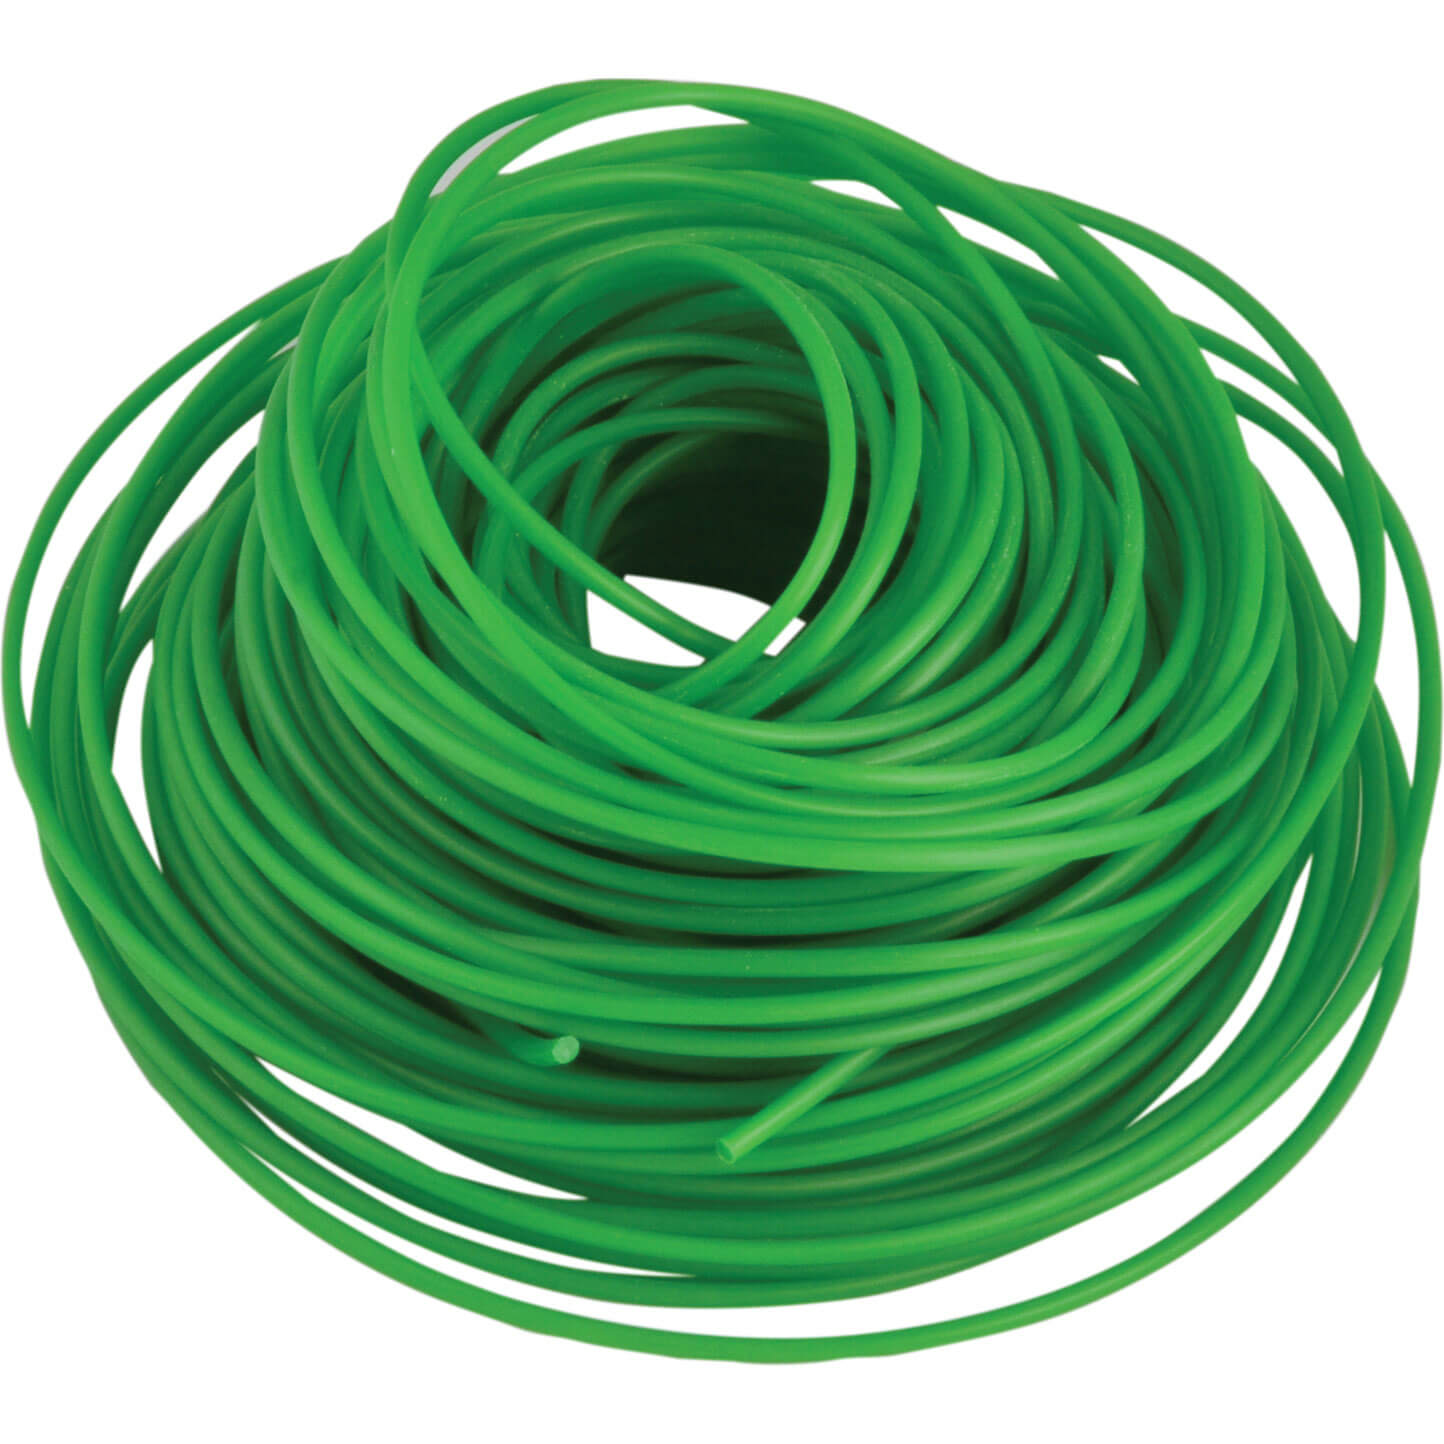 Photo of Alm Trimmer Line 2mm X 20m For Grass Trimmers Pack Of 1